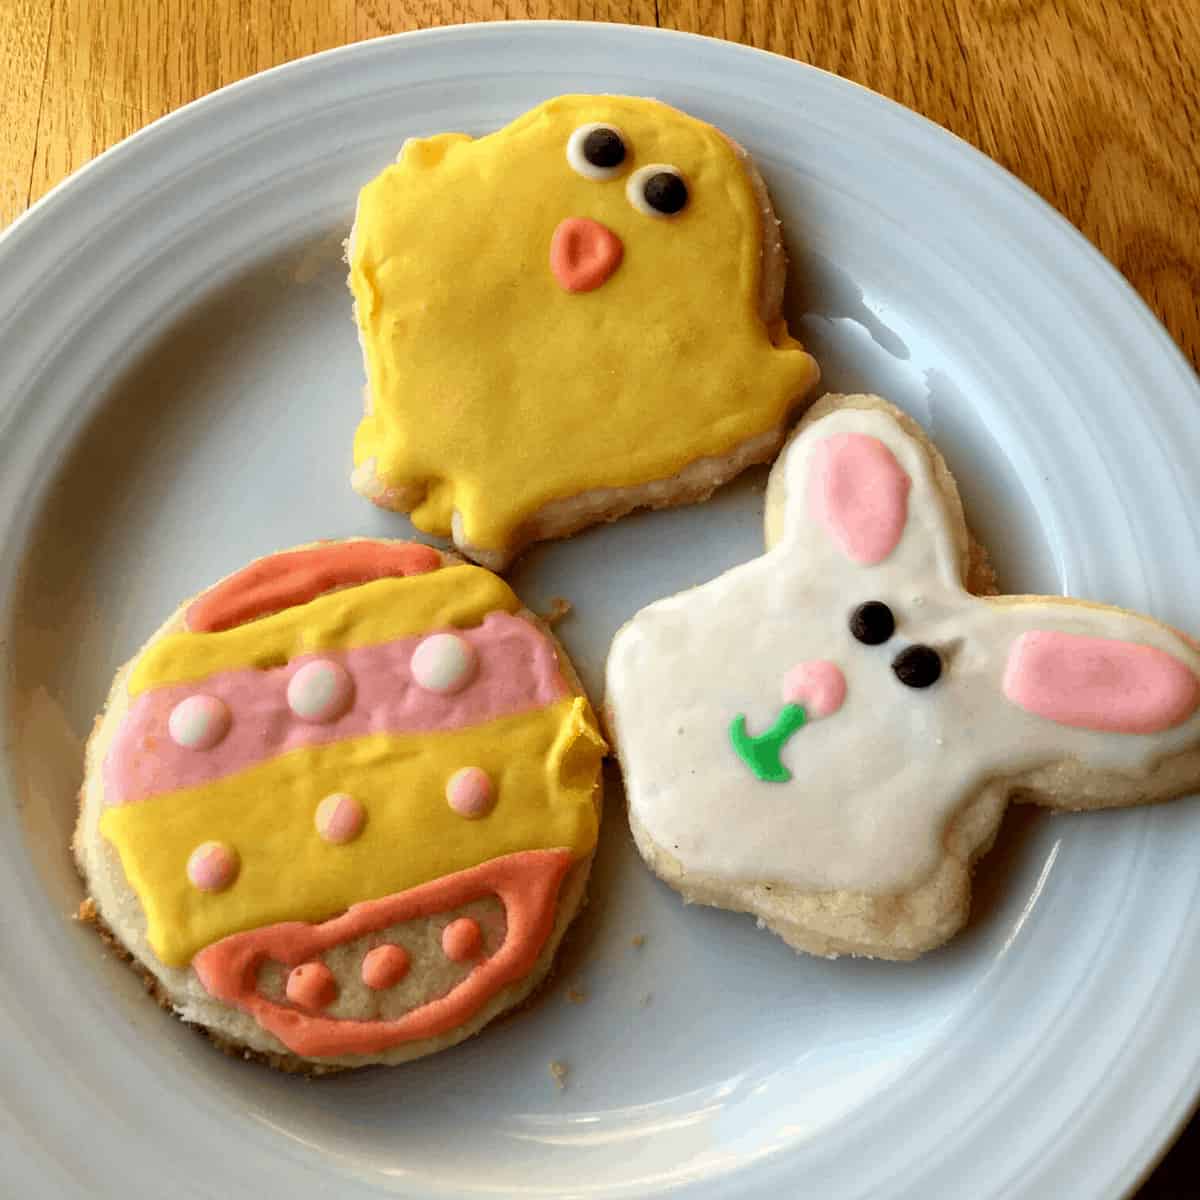 Gluten free sugar cookies in Easter shapes